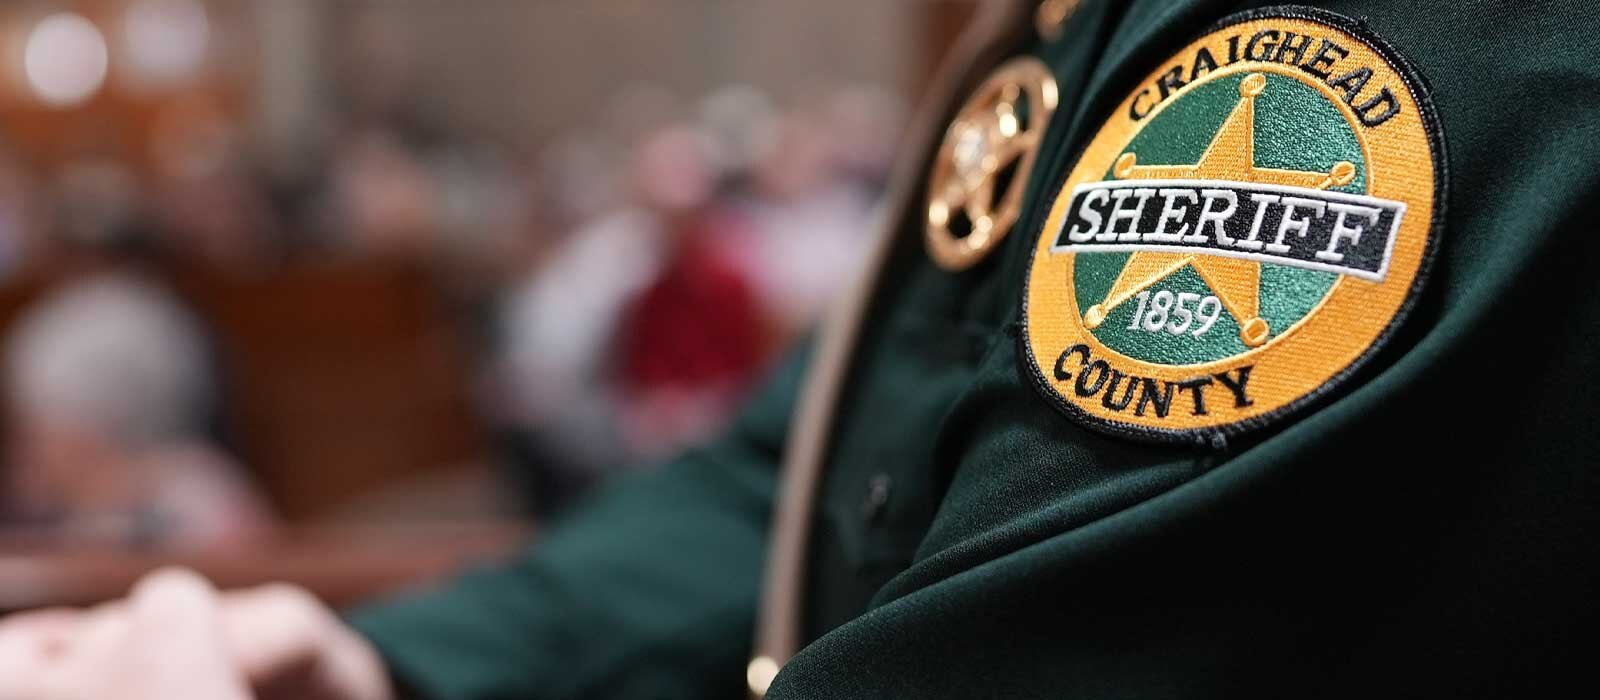 Close up of Craighead County Sheriff patch on a uniform